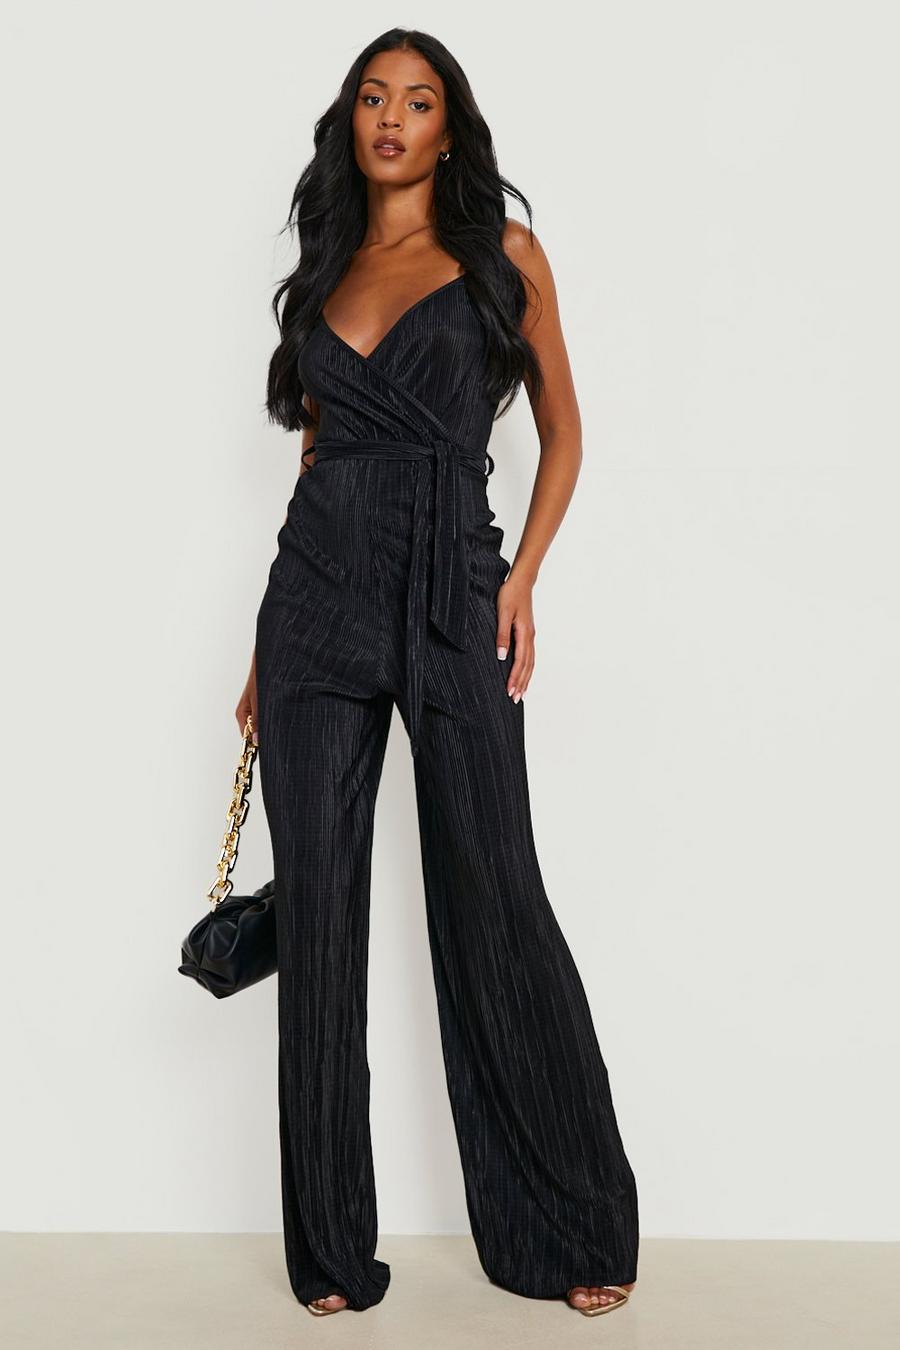 Tag telefonen sikkerhed Hest Jumpsuits & Rompers for Tall Women | boohoo USA